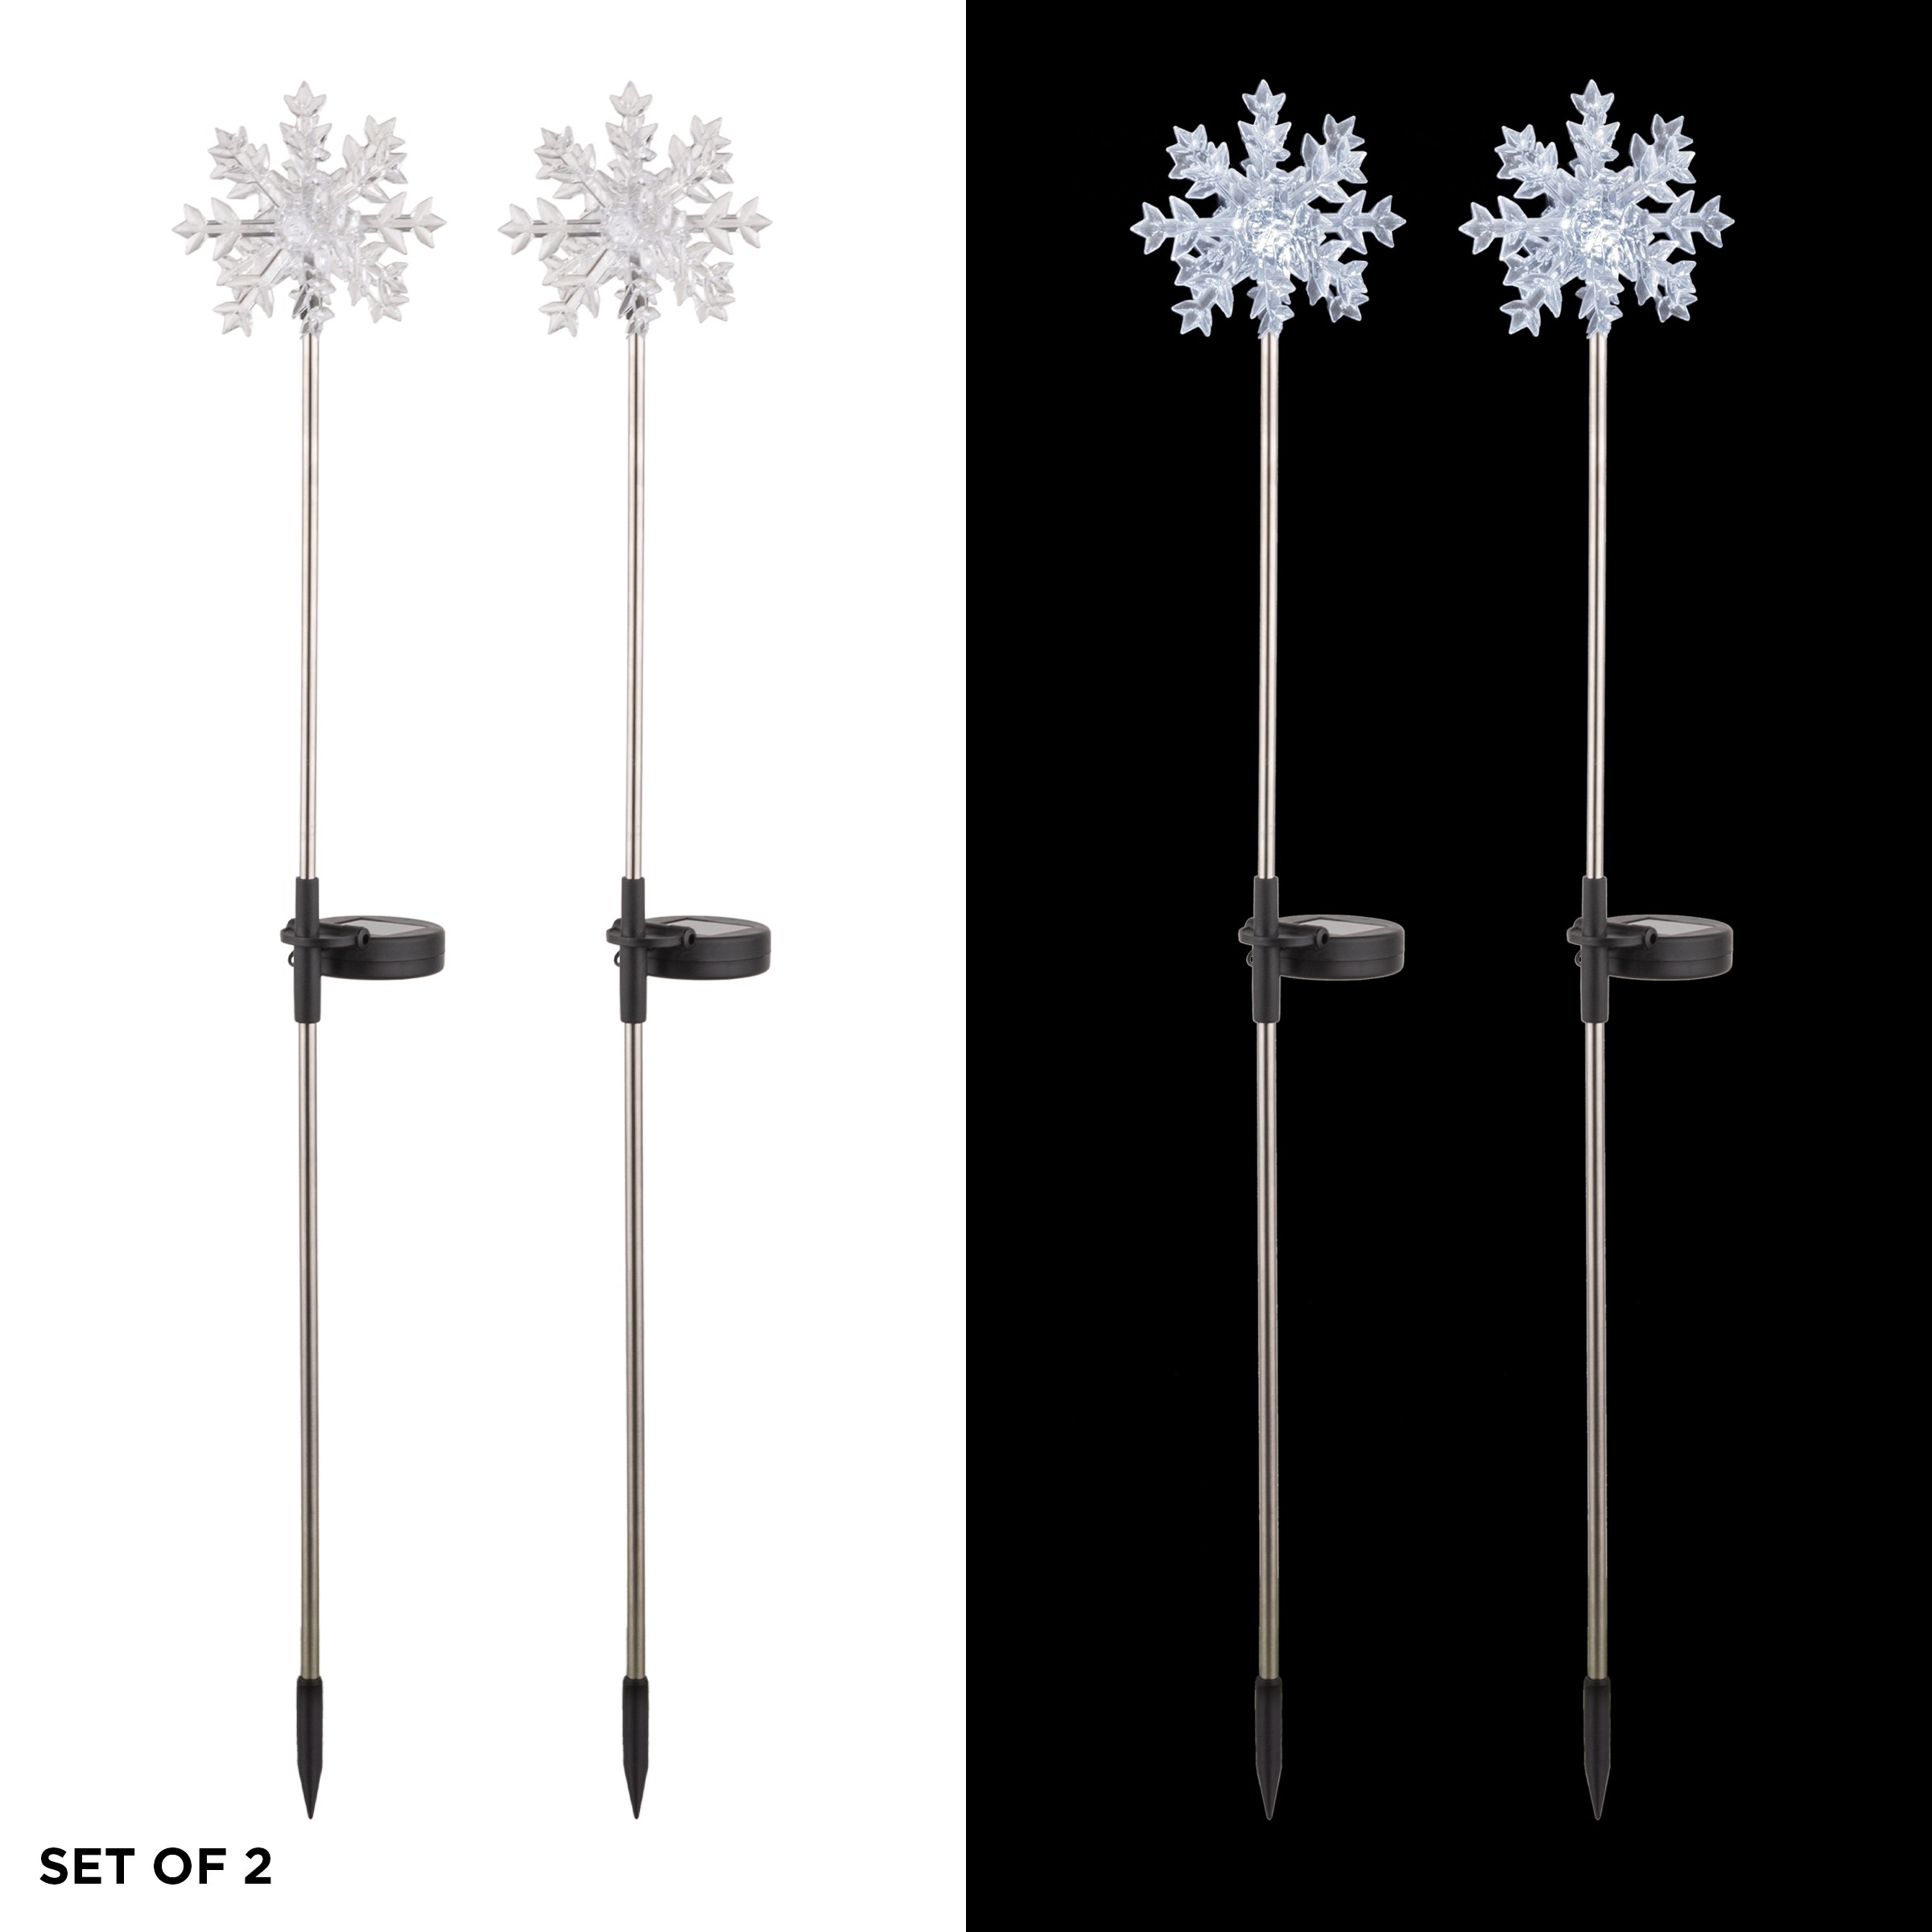 Alpine Corporation 33"H Outdoor Solar 3D Snowflake Garden Lawn Stakes with LED Lights (Set of 2)